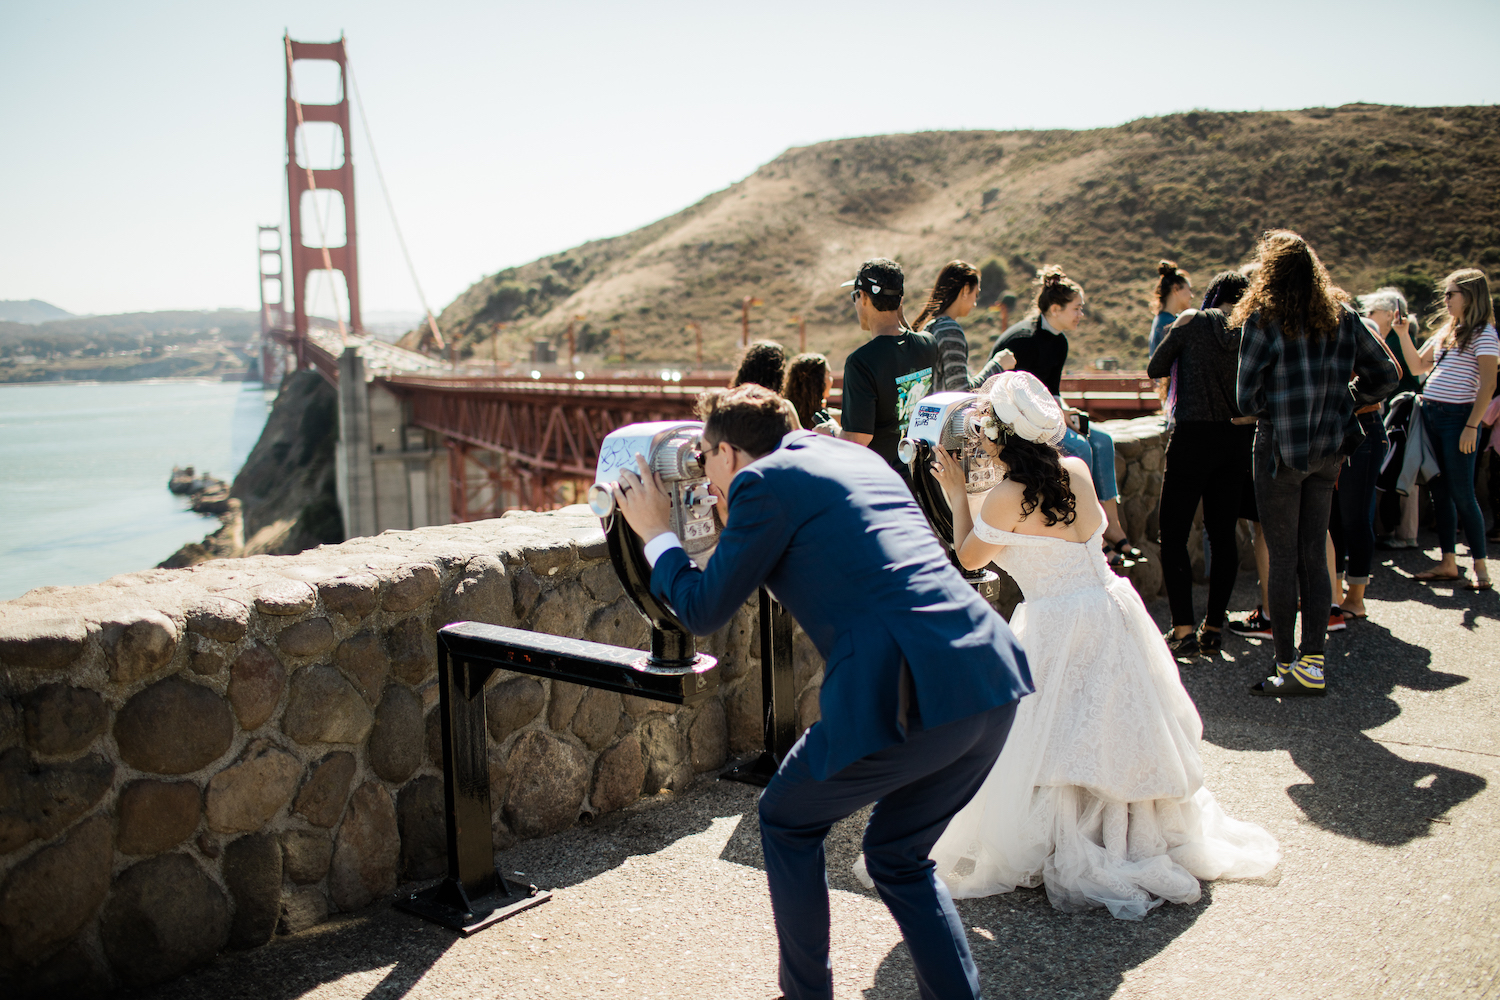 A wedding couple view the Golden Gate Bridge through view finders.